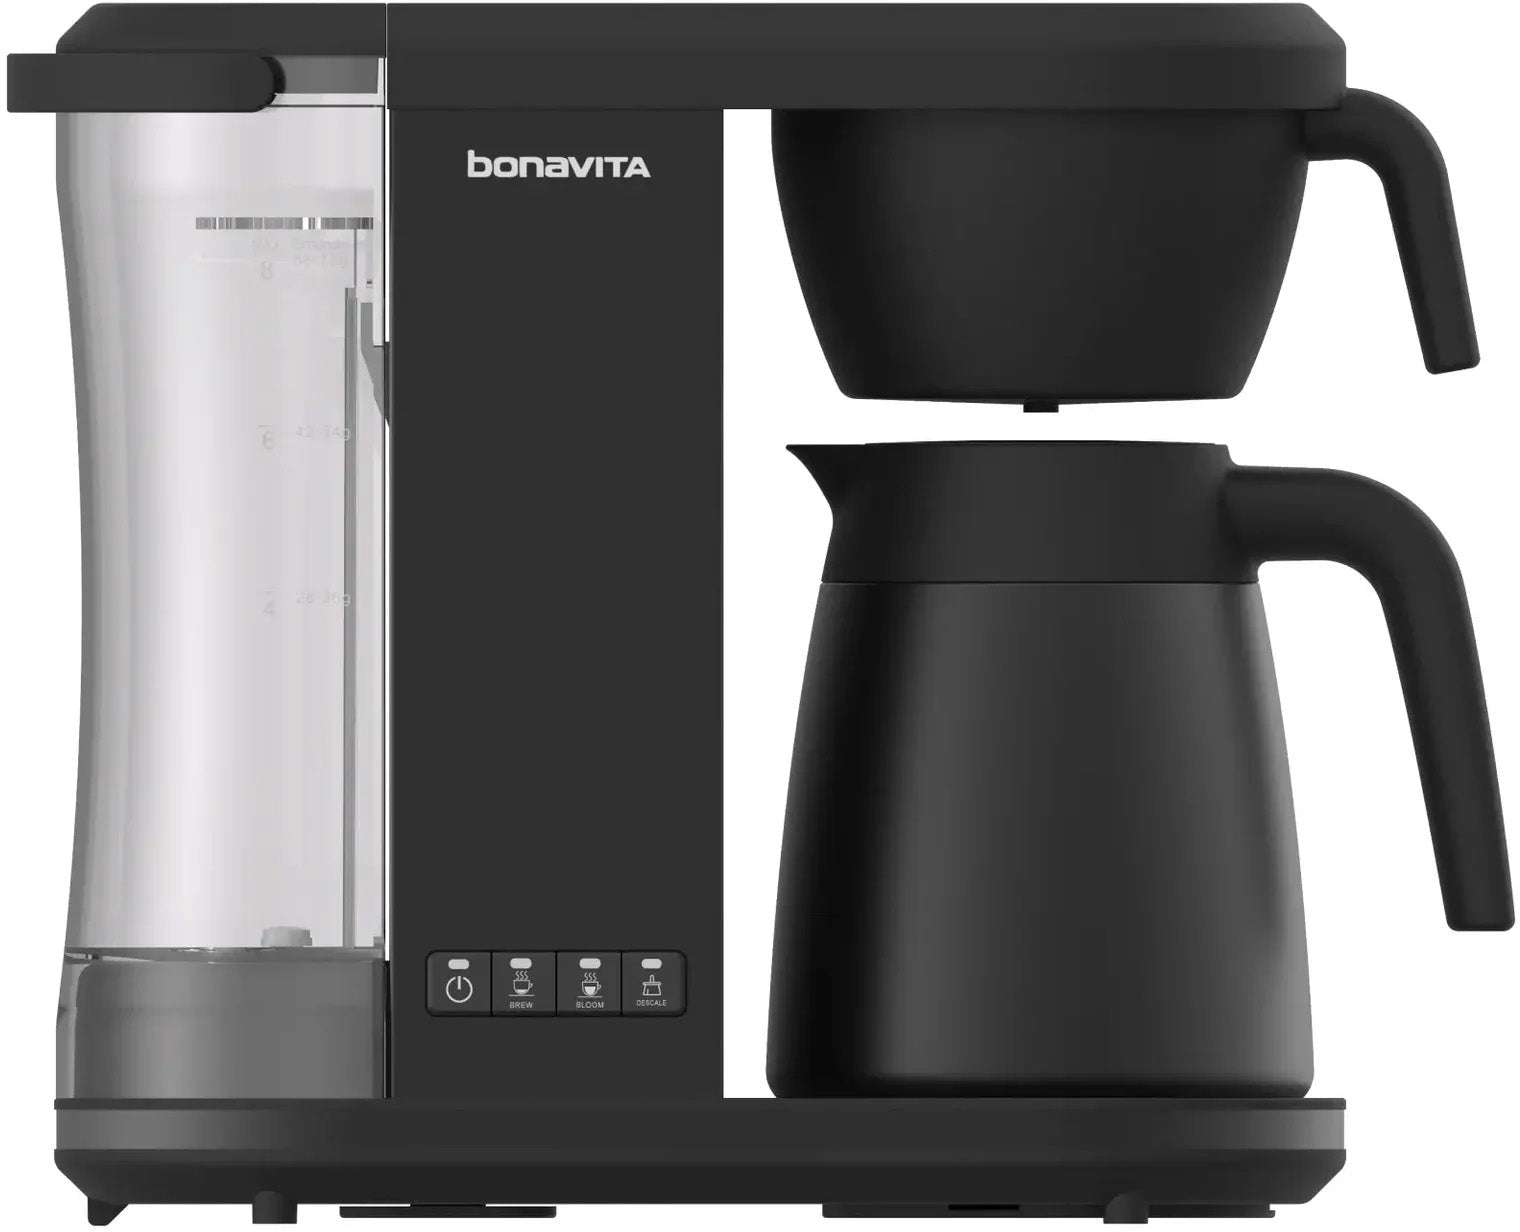 Bonavita Enthusiast 8-Cup Drip Coffee Maker with Thermal Carafe in Black  Stainless